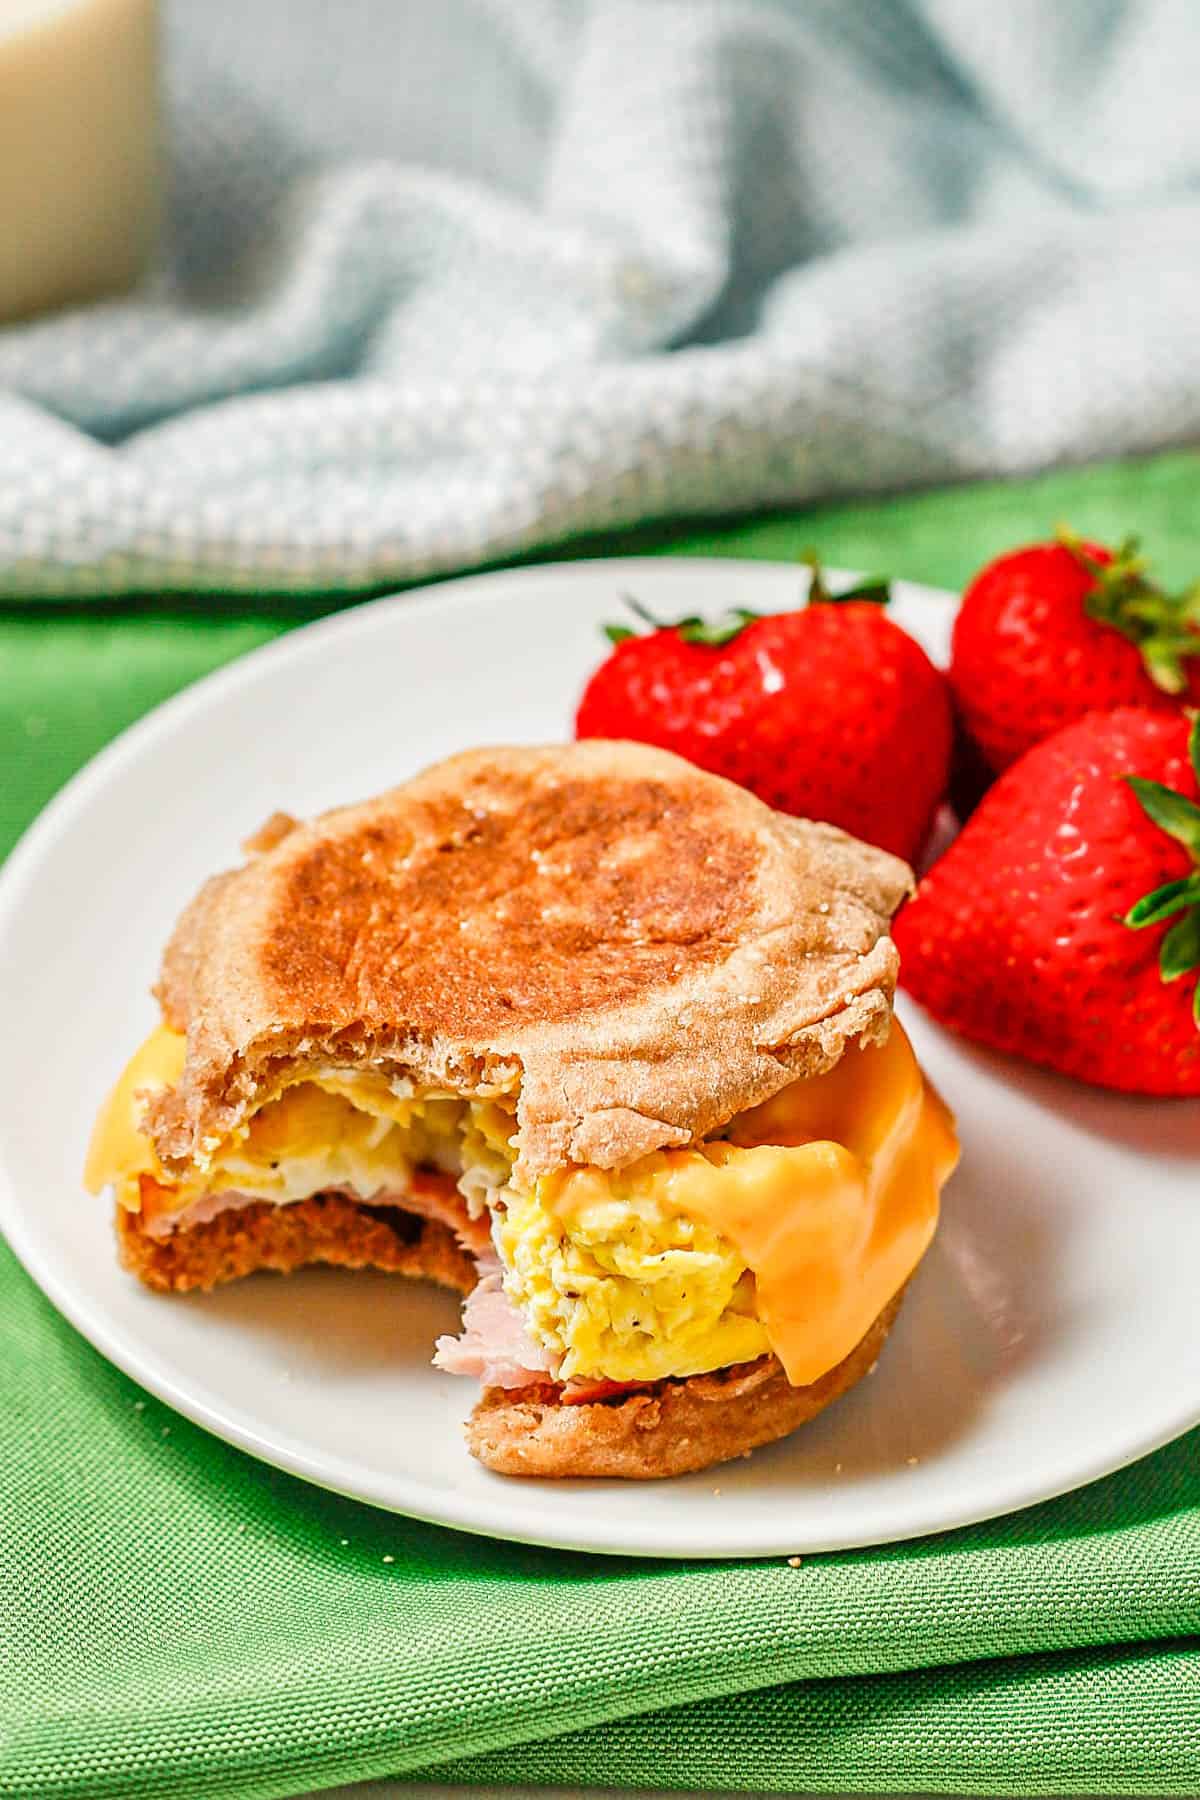 A homemade English muffin sandwich on a white plate with a bite taken out of it.